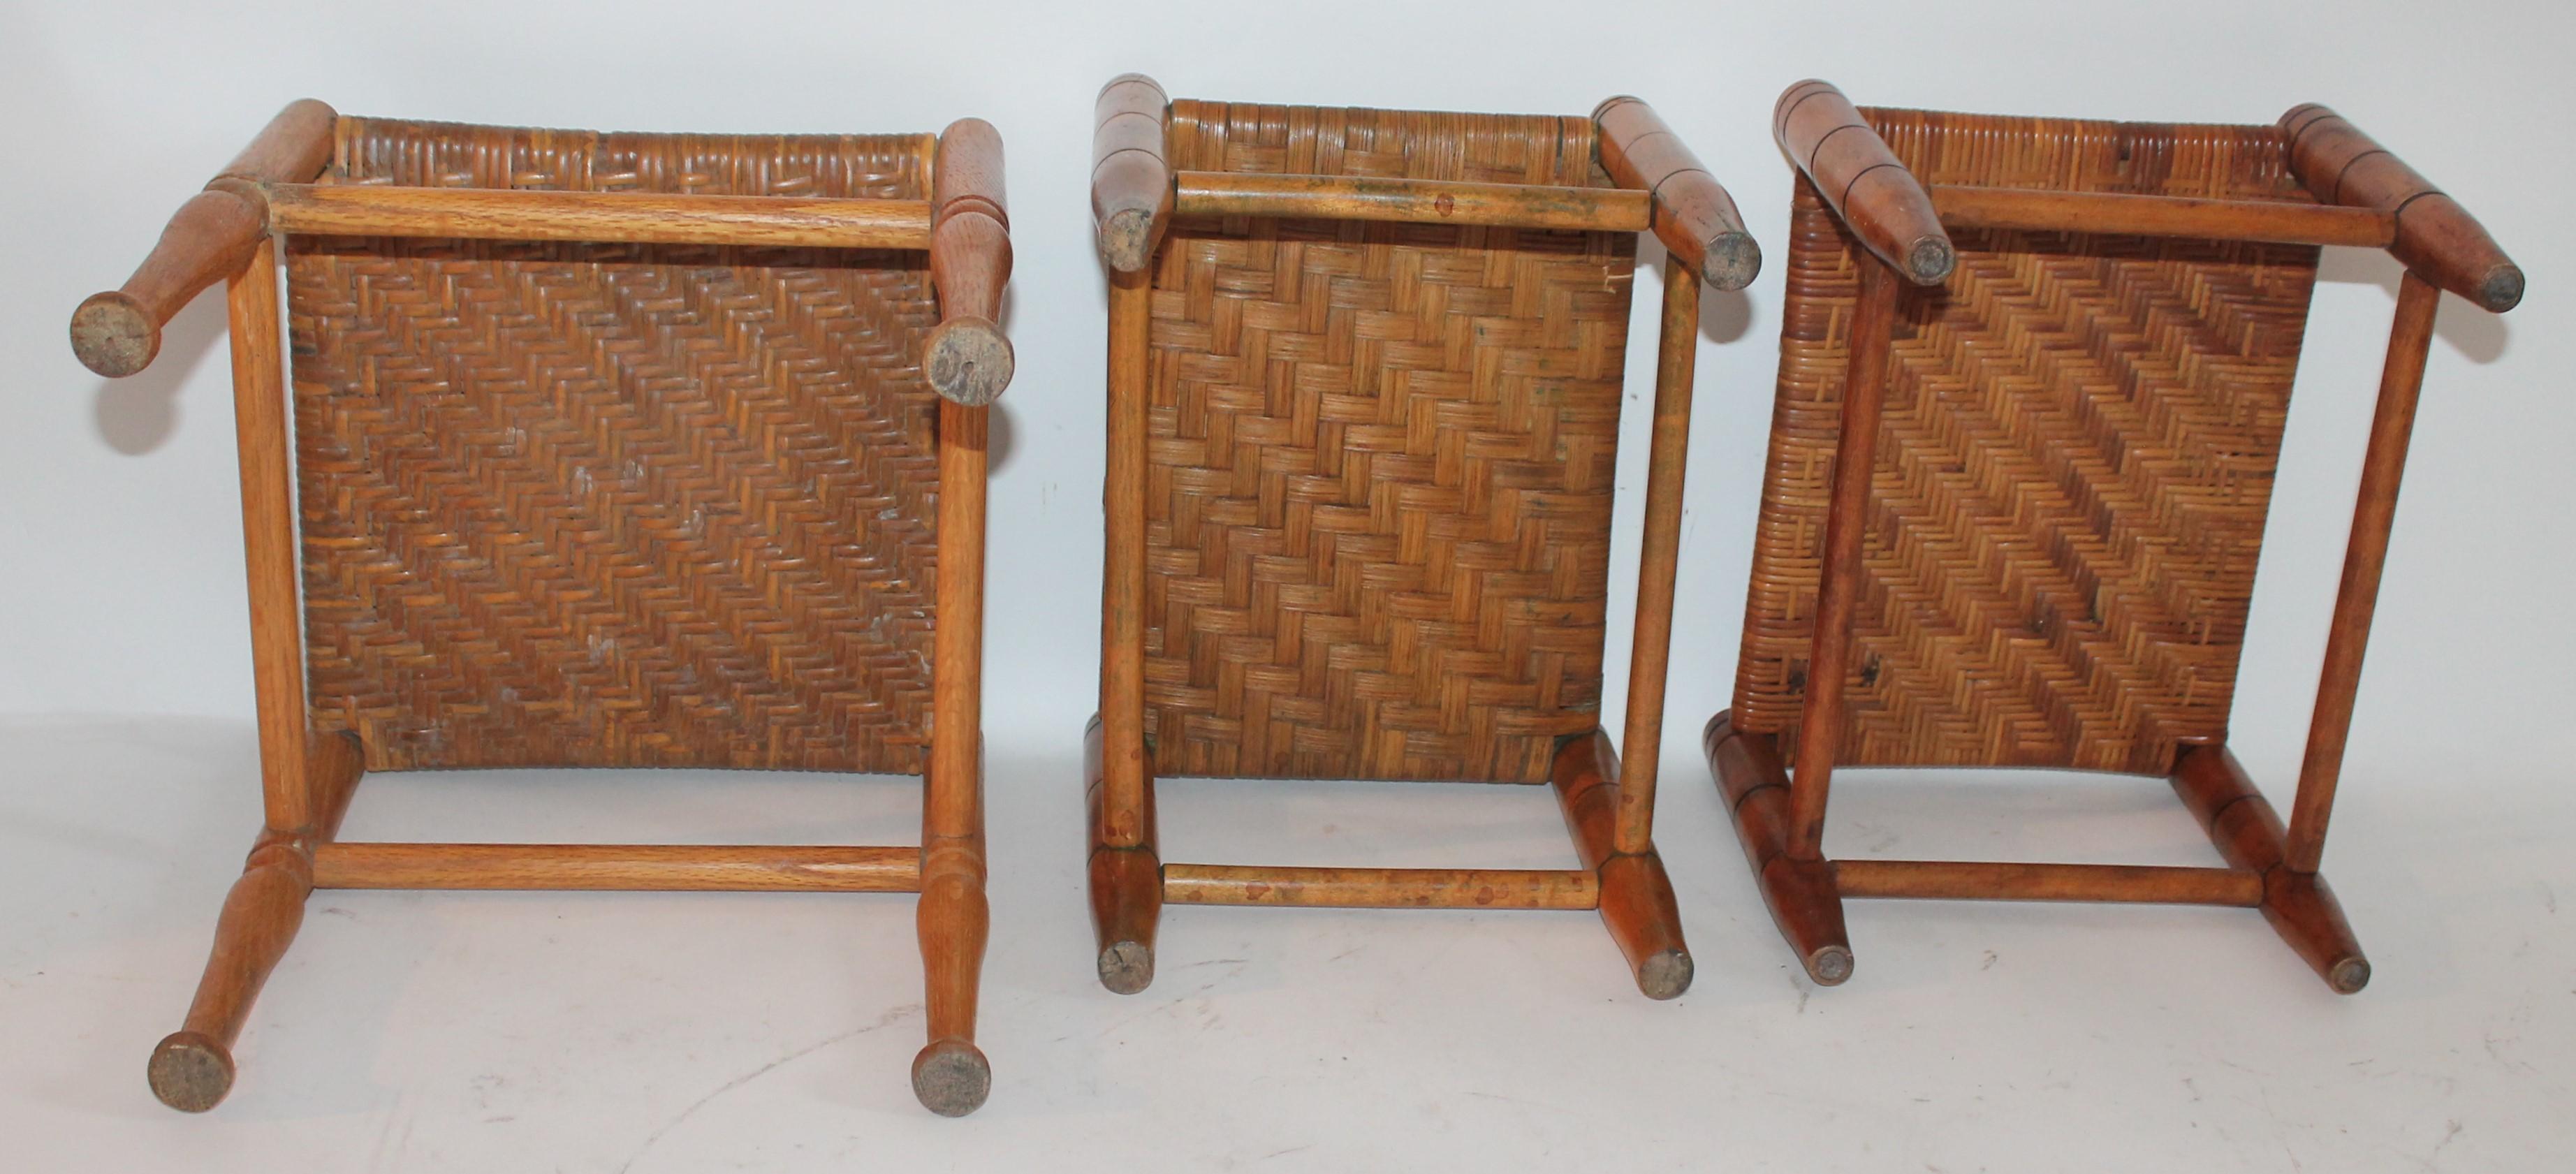 Wood Collection of 3, 19th Century Foot Stools